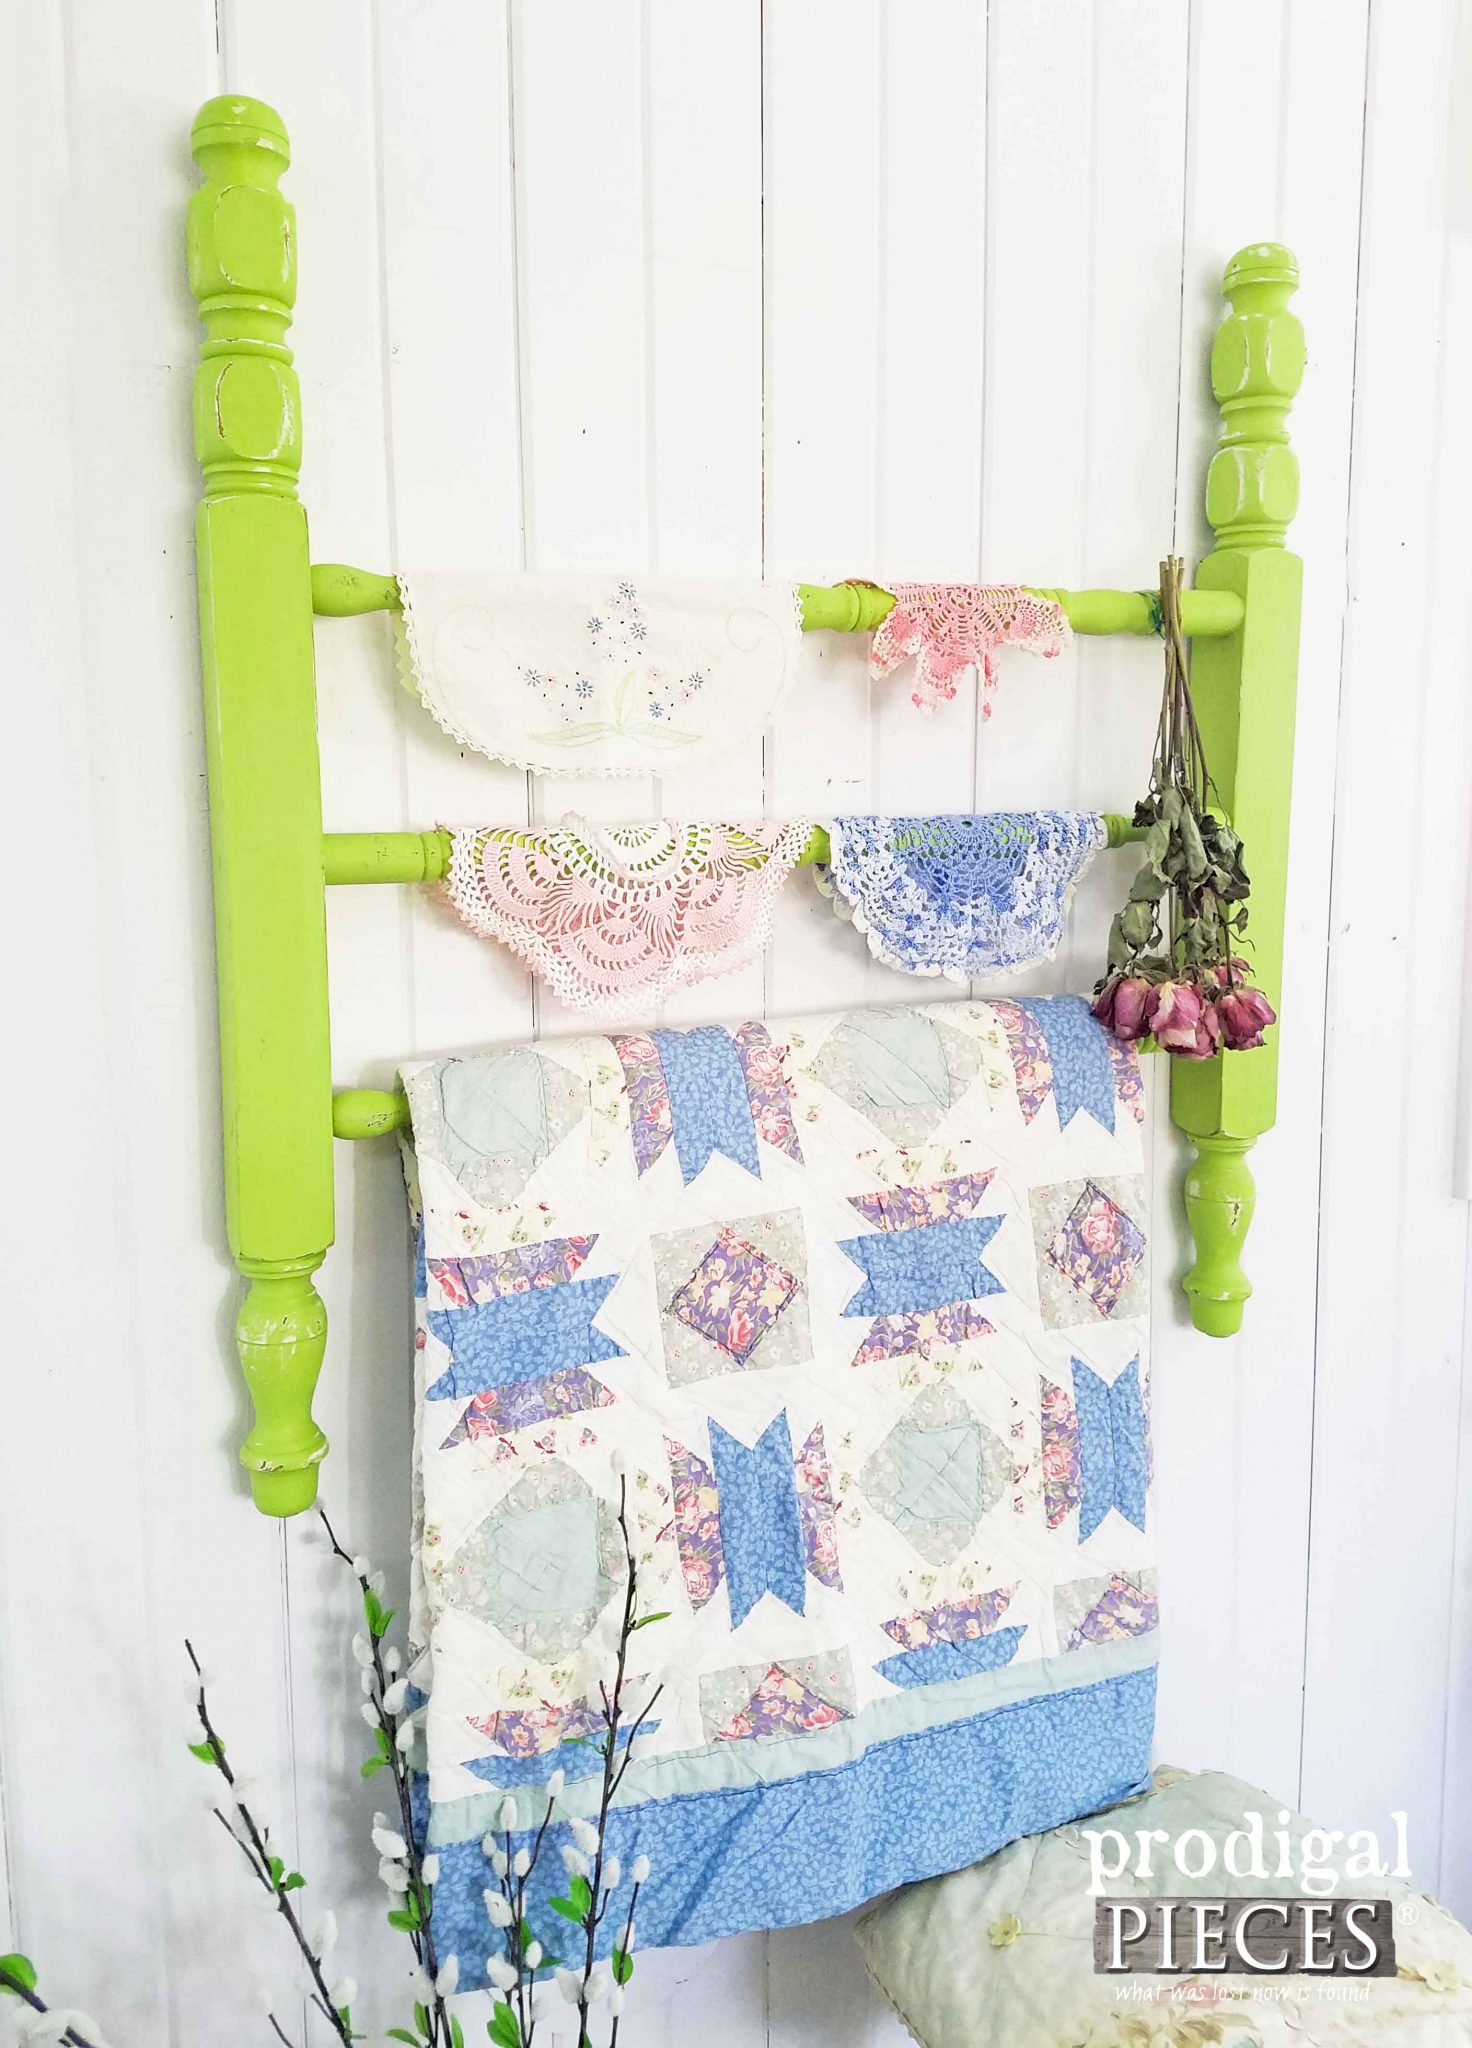 DIY Quilt Rack from Reclaimed Parts by Prodigal Pieces | prodigalpieces.com